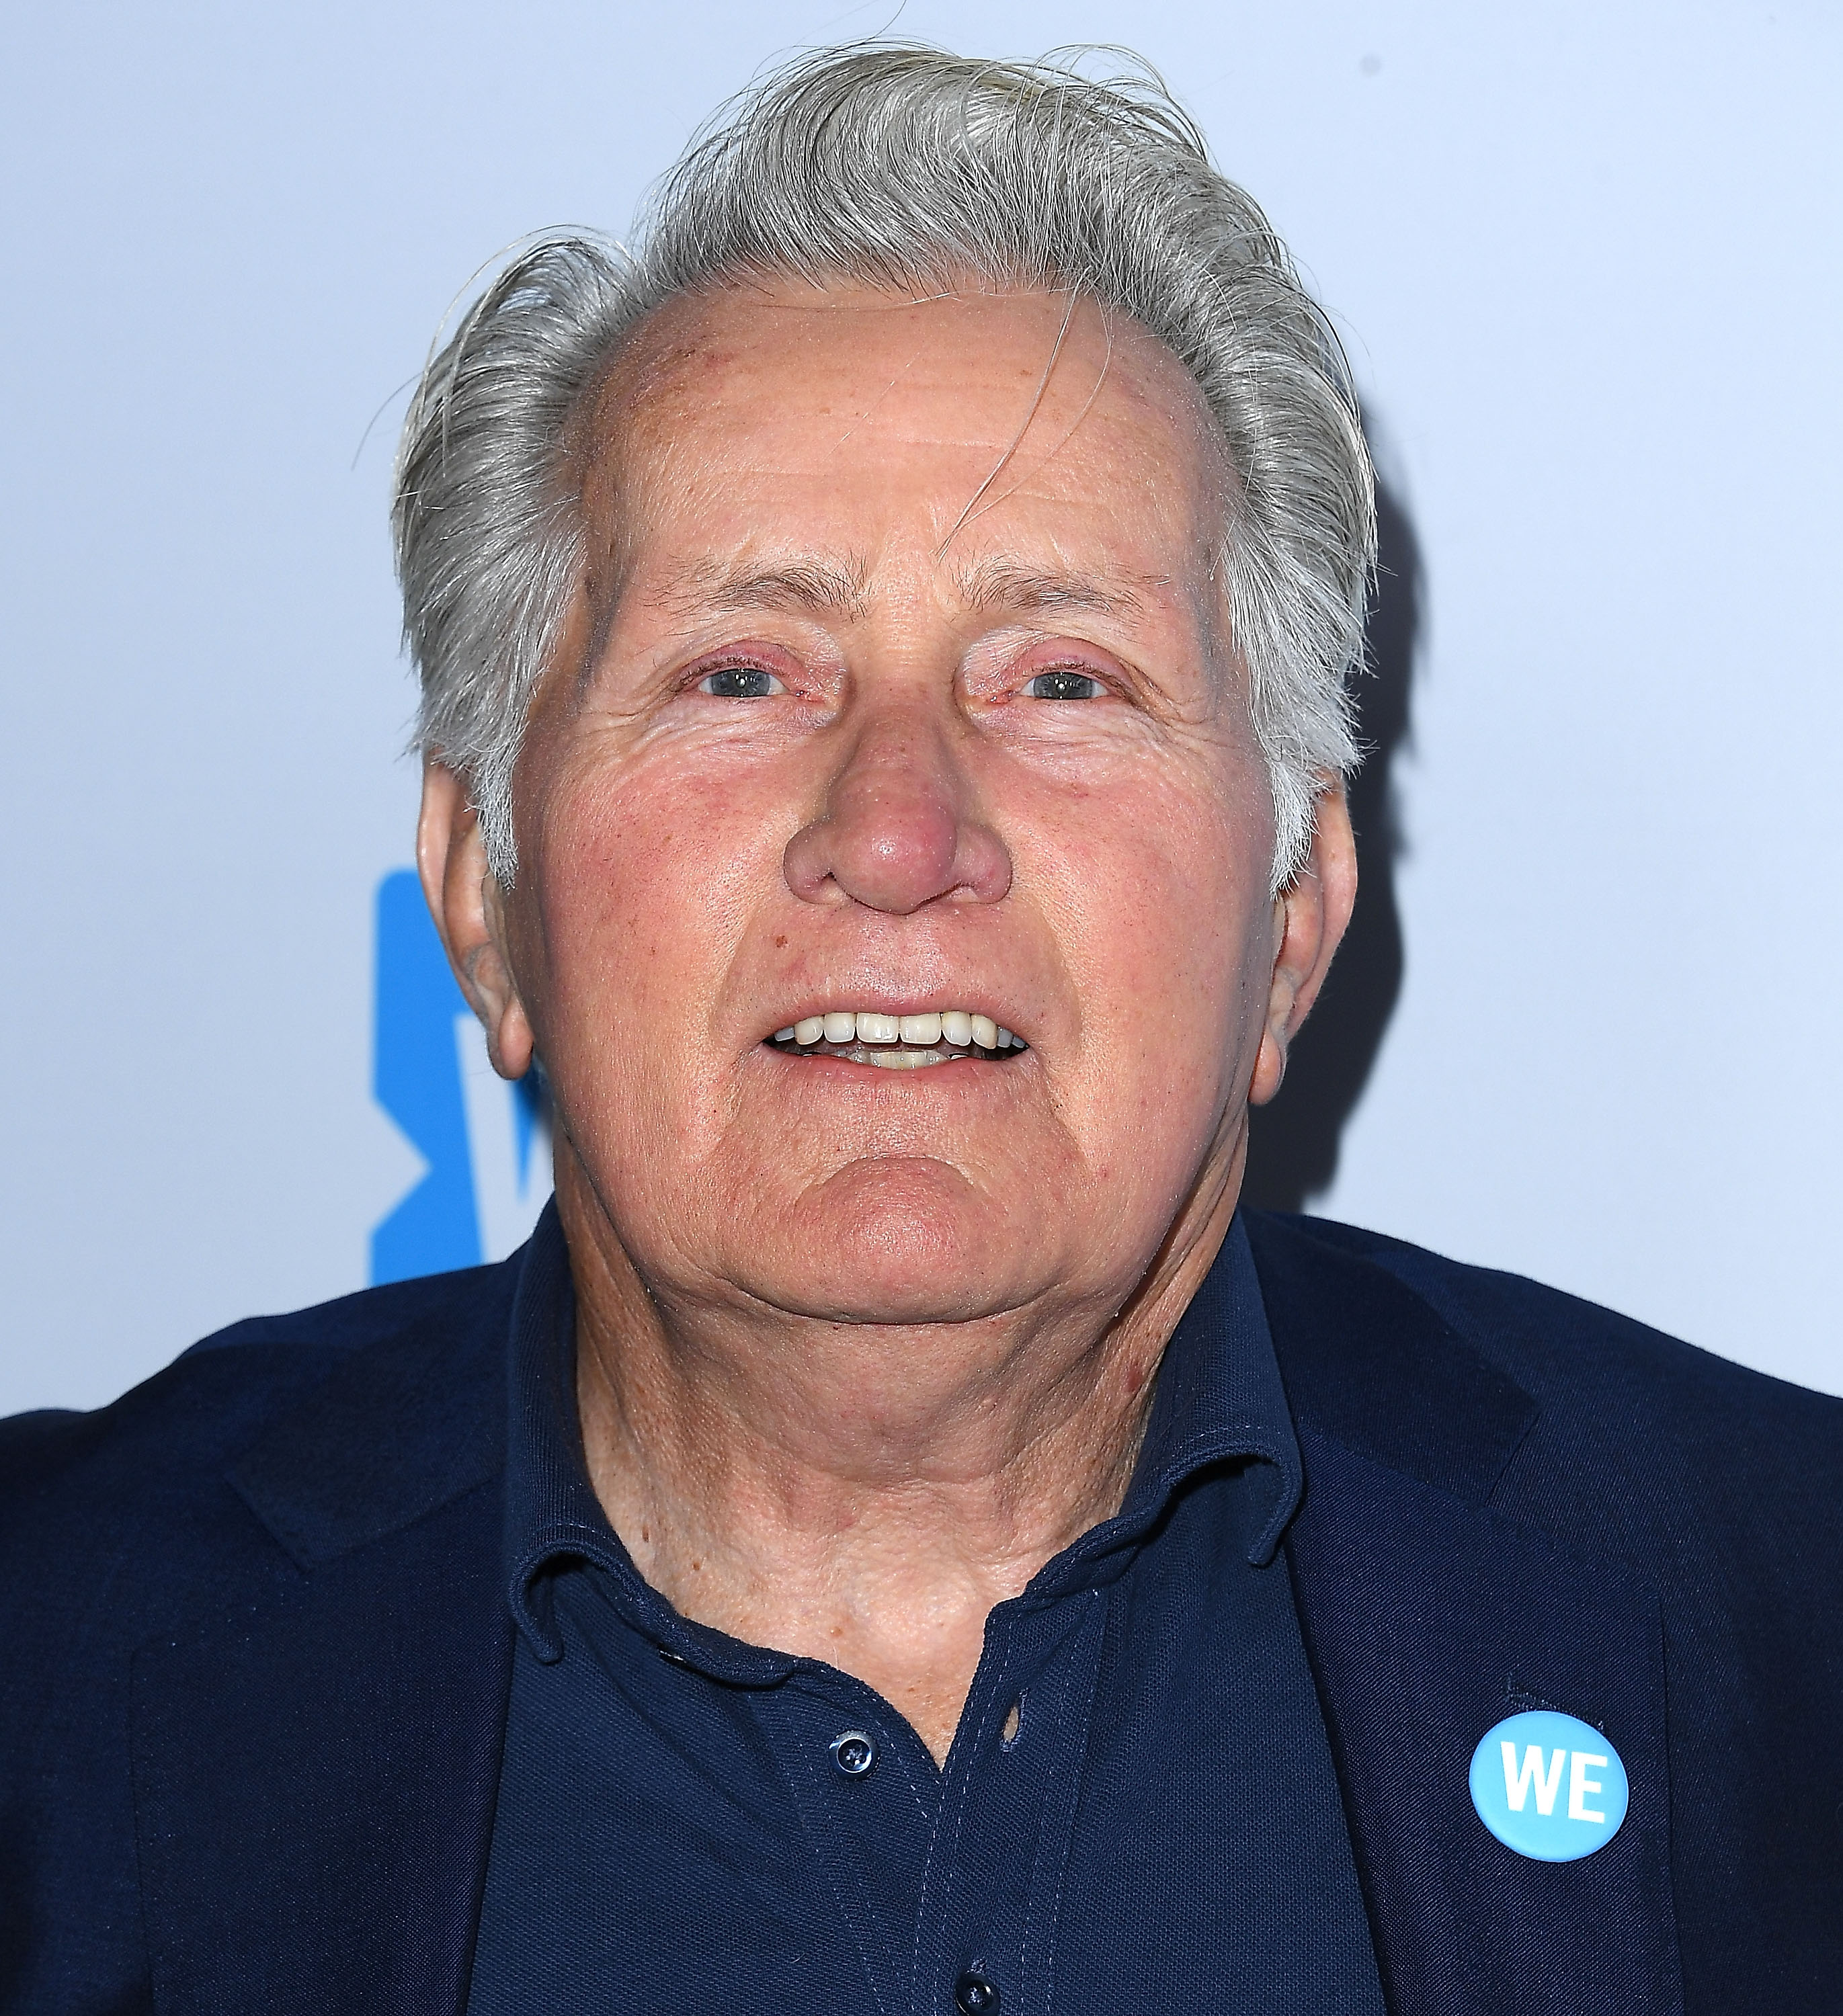 Martin Sheen arriving at the WE Day California To Celebrate Young People Changing The World at The Forum on April 19, 2018 in Inglewood, California. / Source: Getty Images